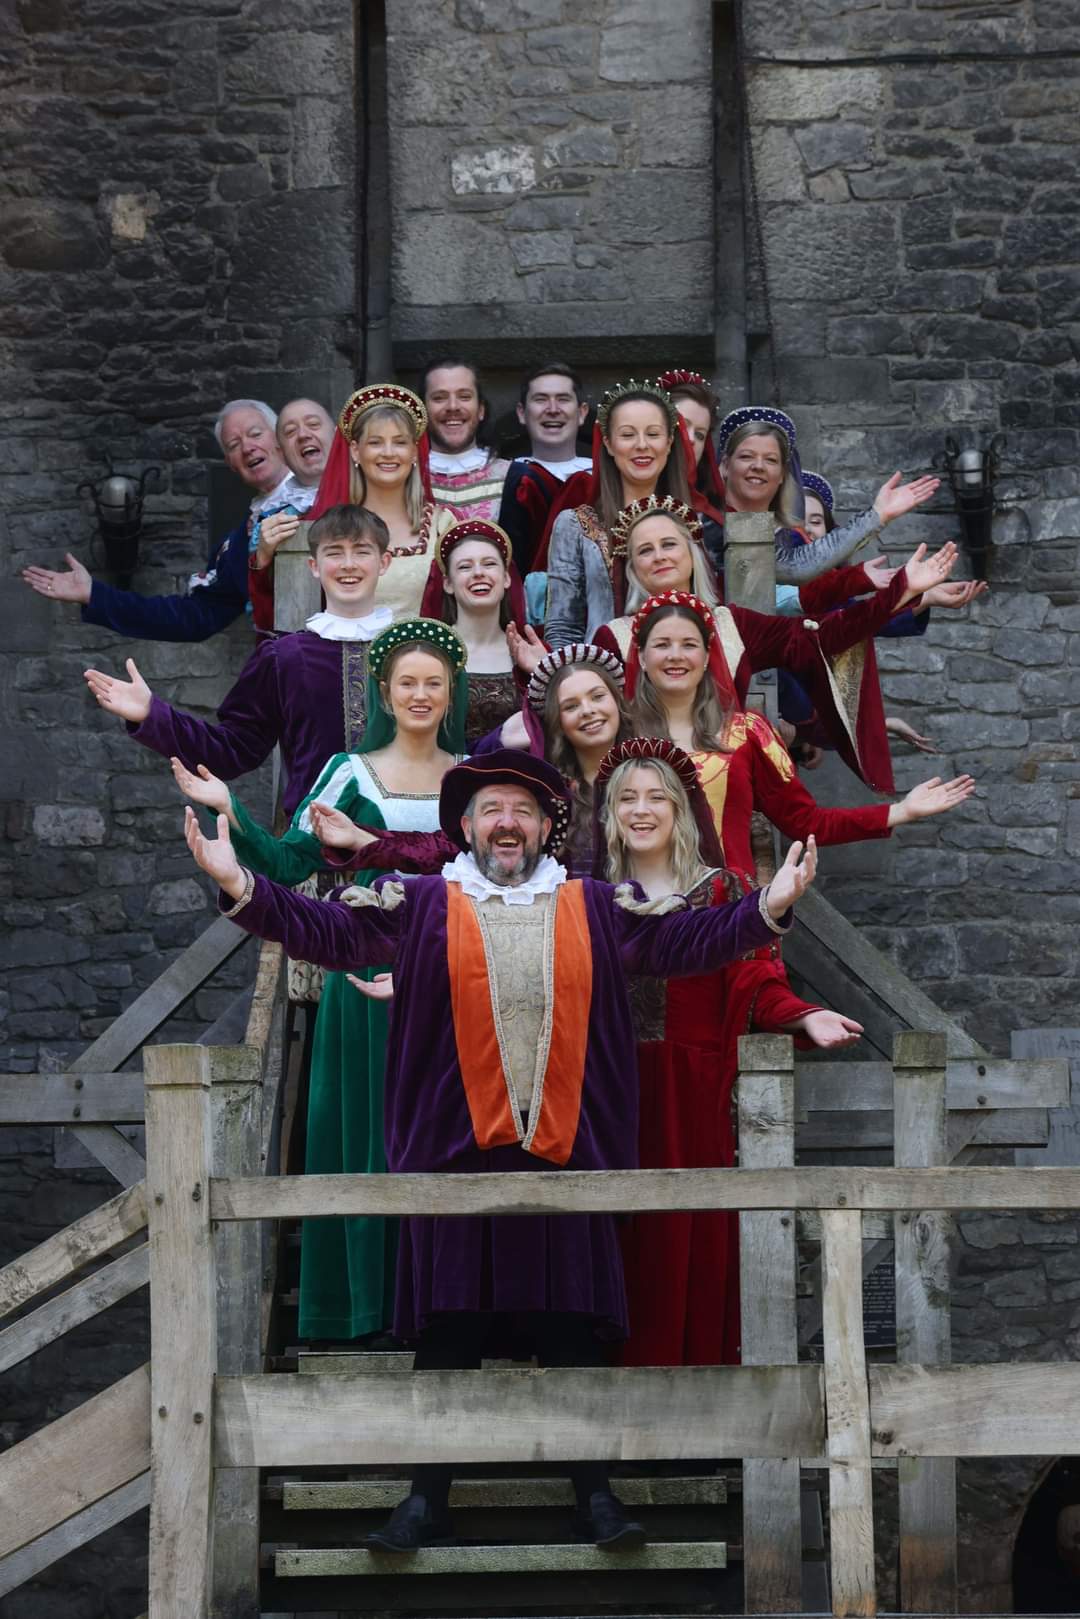 Exhibition Marks 60 Years Of The Bunratty Castle Medieval Banquet